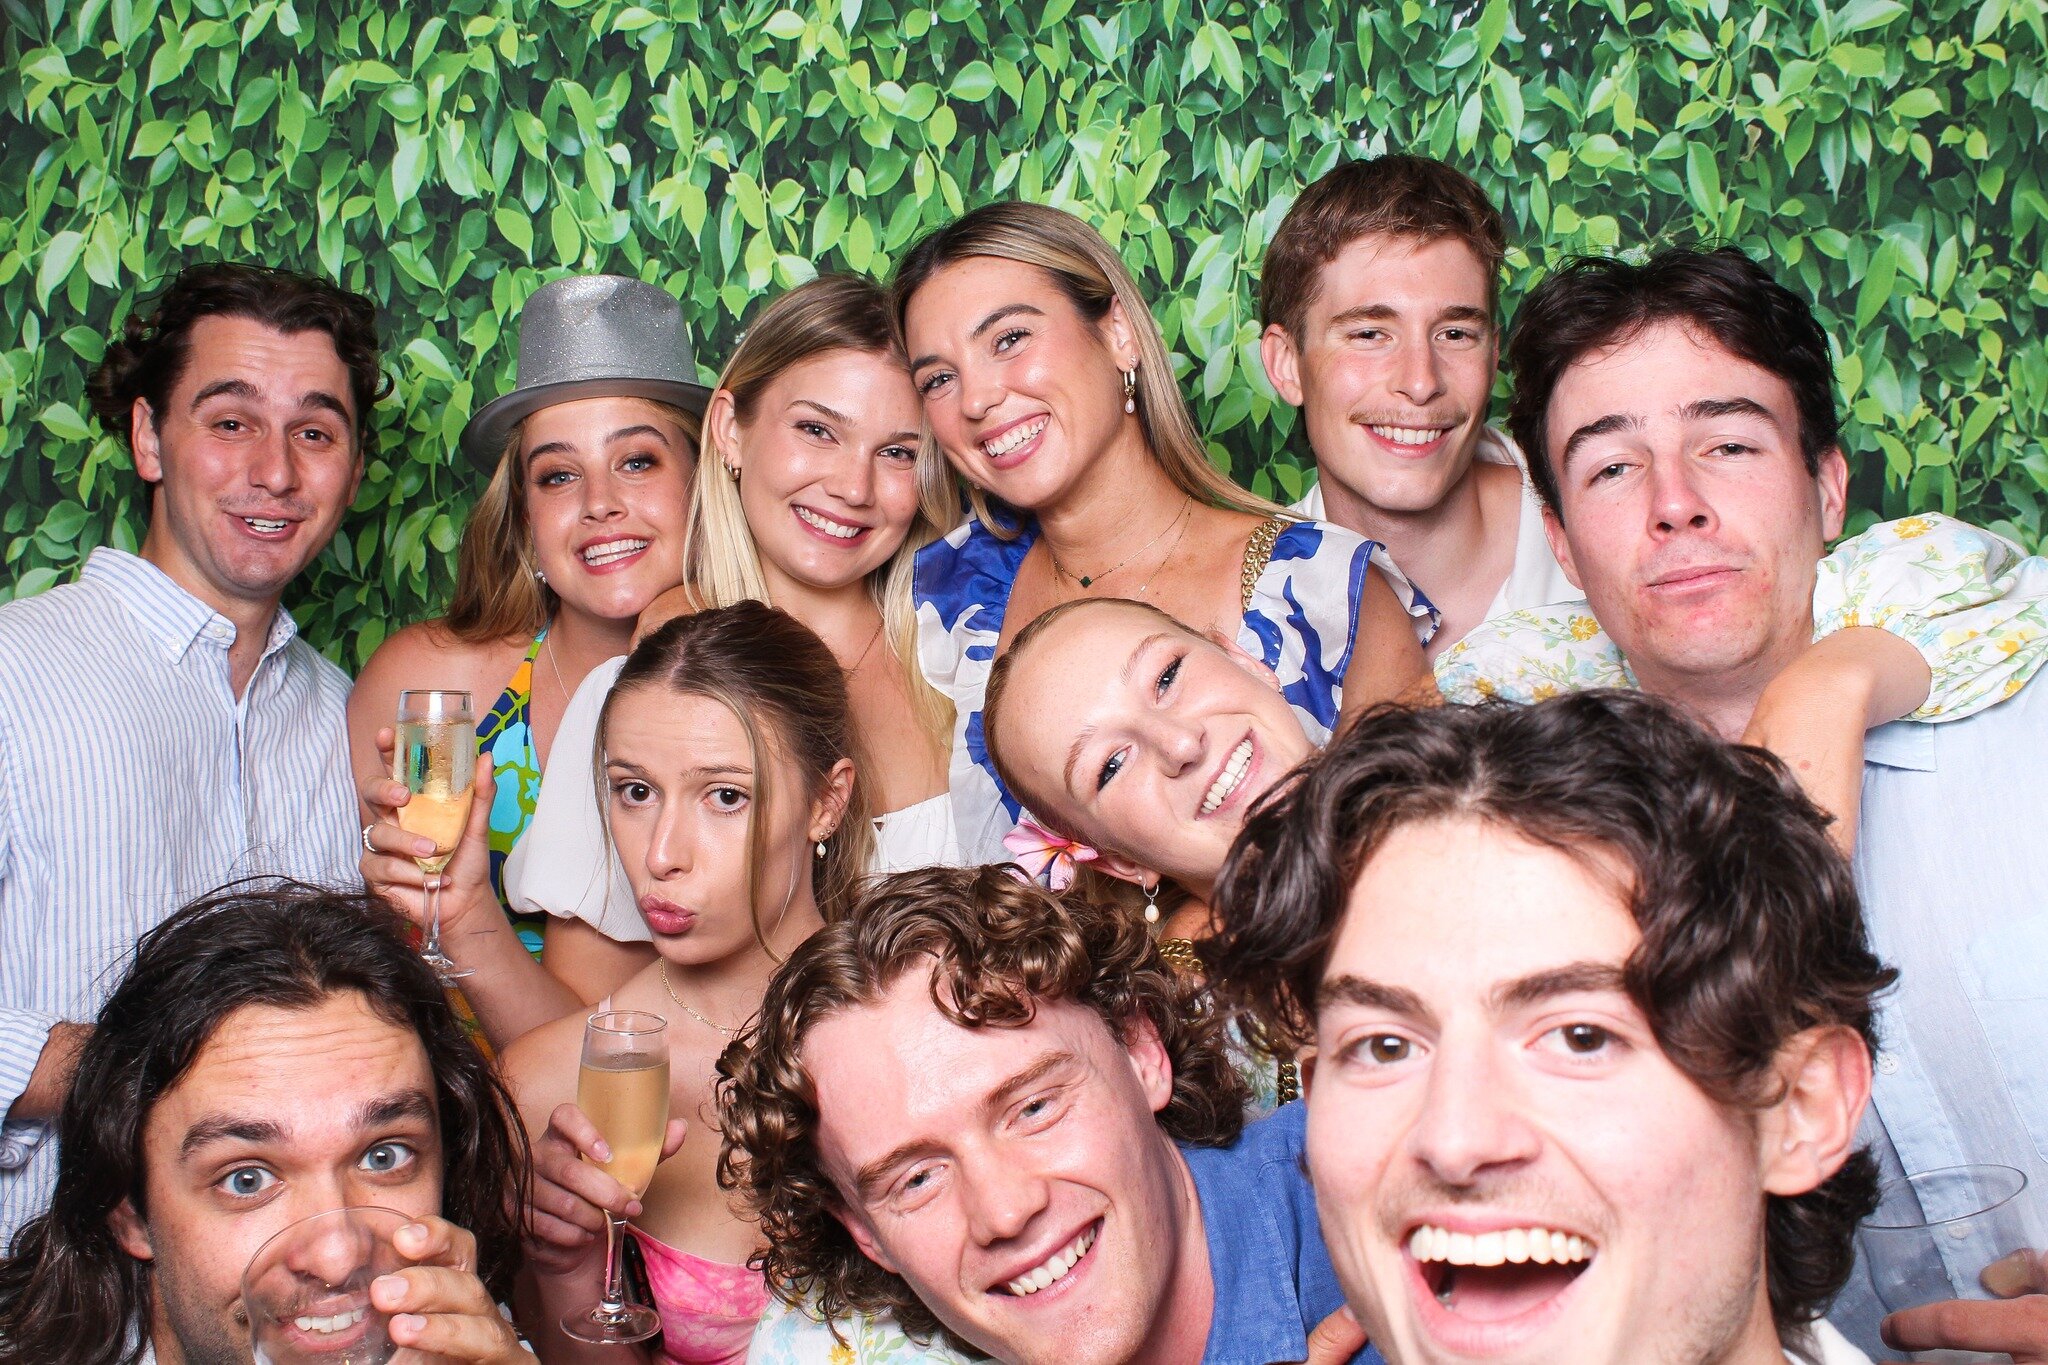 🚨 NEW BACKDROPS ALERT 

Say cheese! 📷 Up your photobooth game with our all-new backdrops now available with any Open Booth hire from Inflatabooth. 

#Inflatabooth #OpenBooth #PicturePerfect&quot;